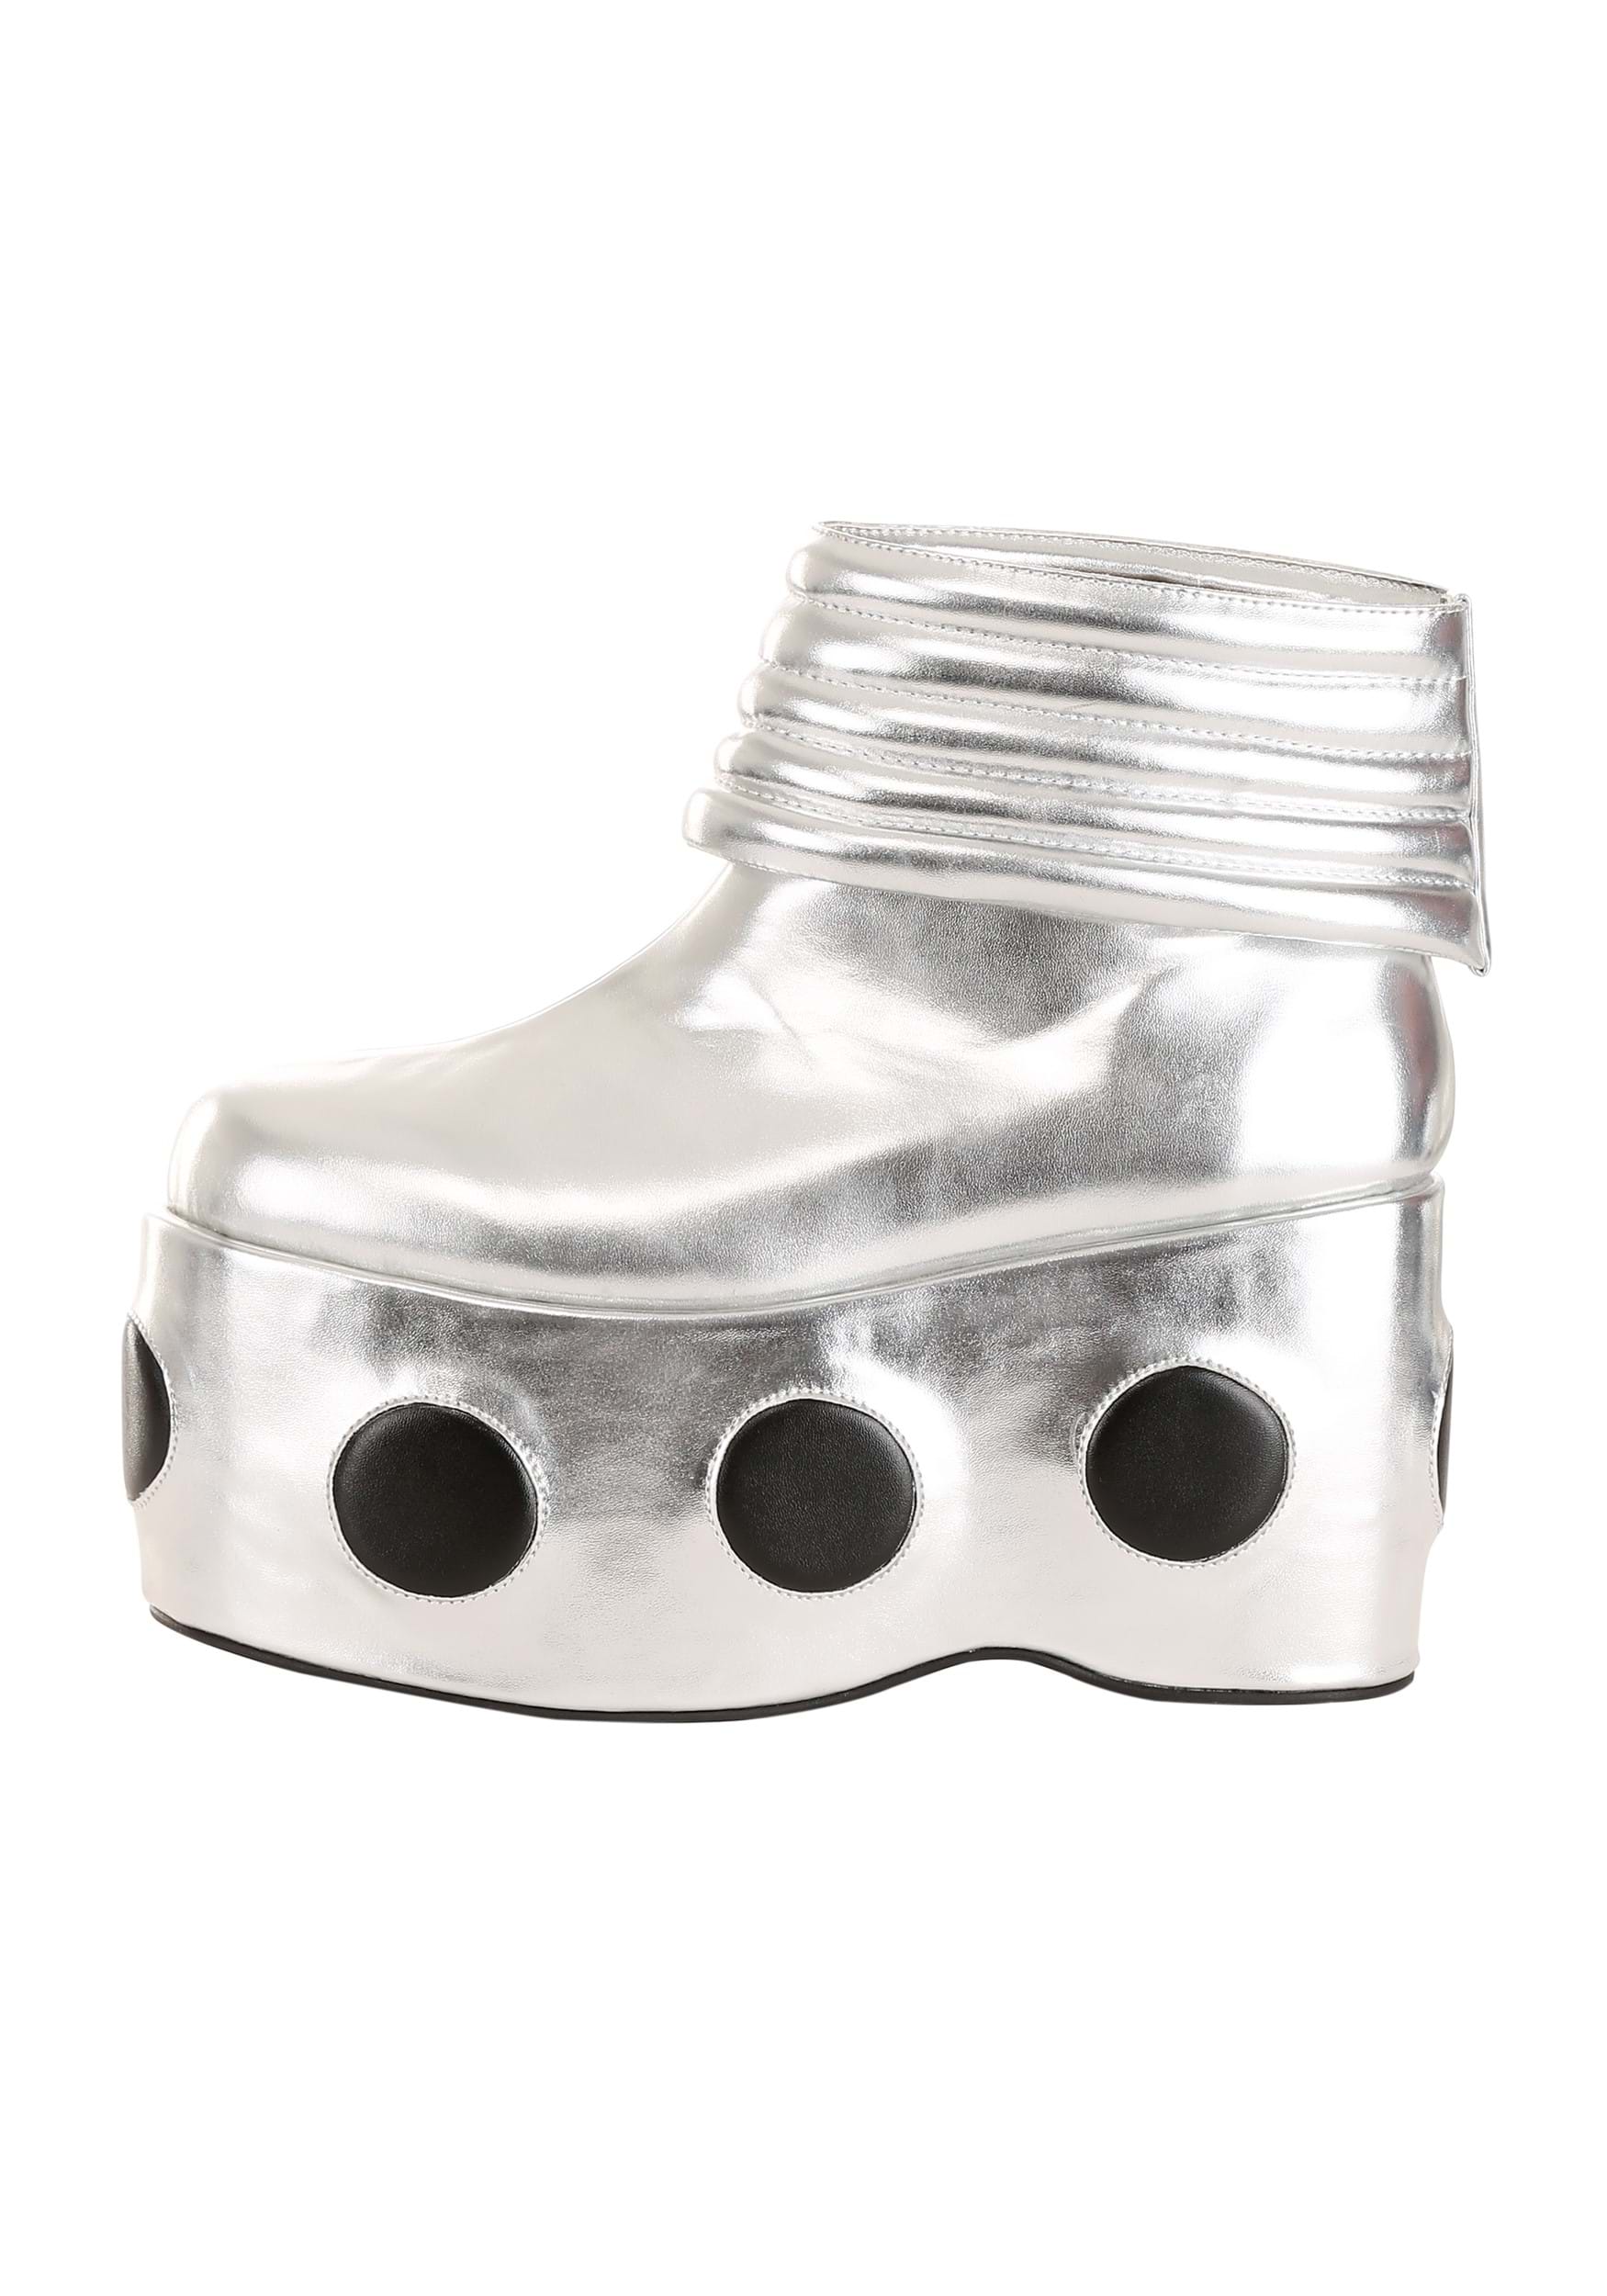 KISS Spaceman Boots , Exclusive Costume Boots